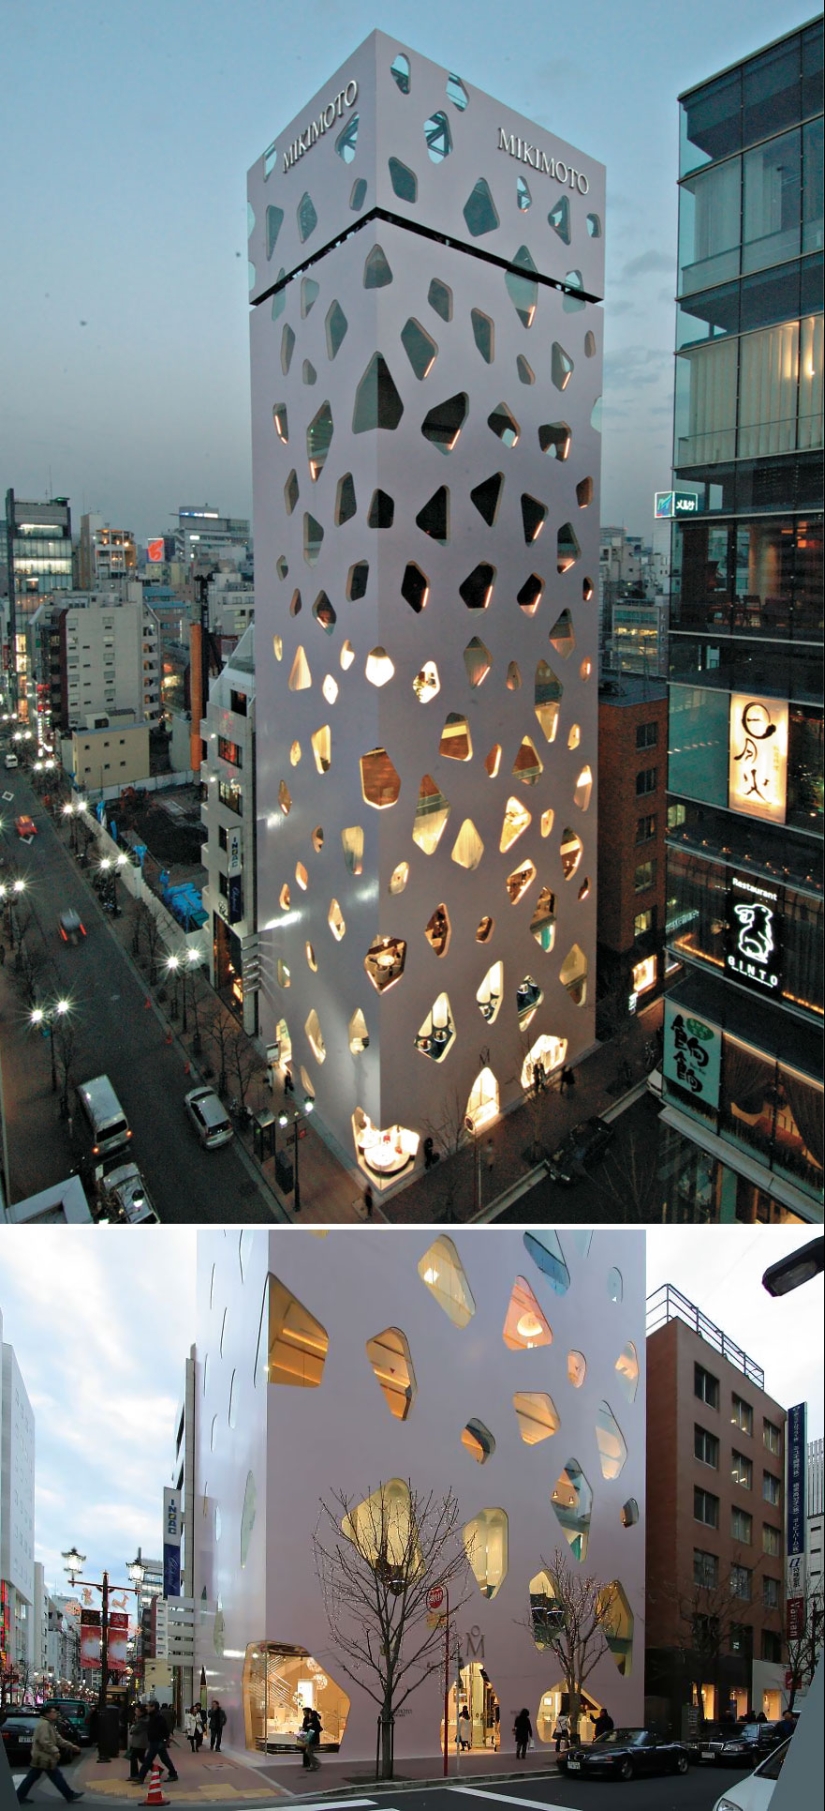 Japanese perversions in architecture